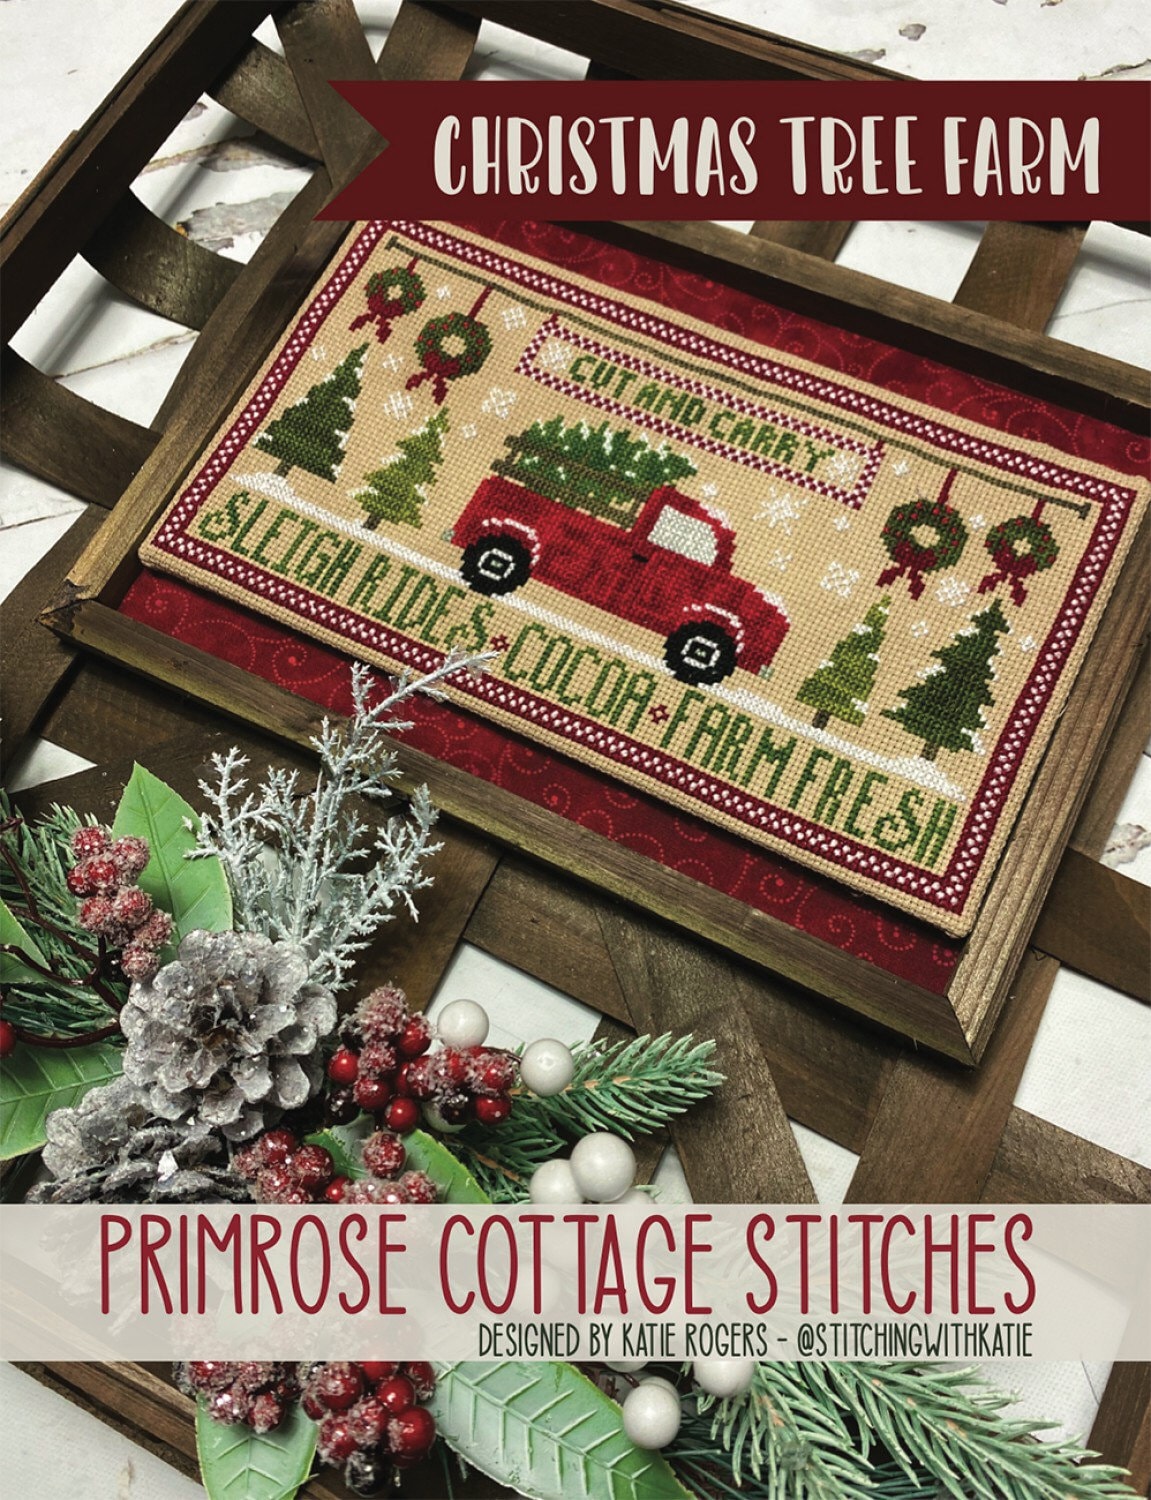 Christmas Tree Farm Cross Stitch Pattern - Primrose Cottage Stitches - Lindsey Weight - Katie Rogers - Stitching With Katie